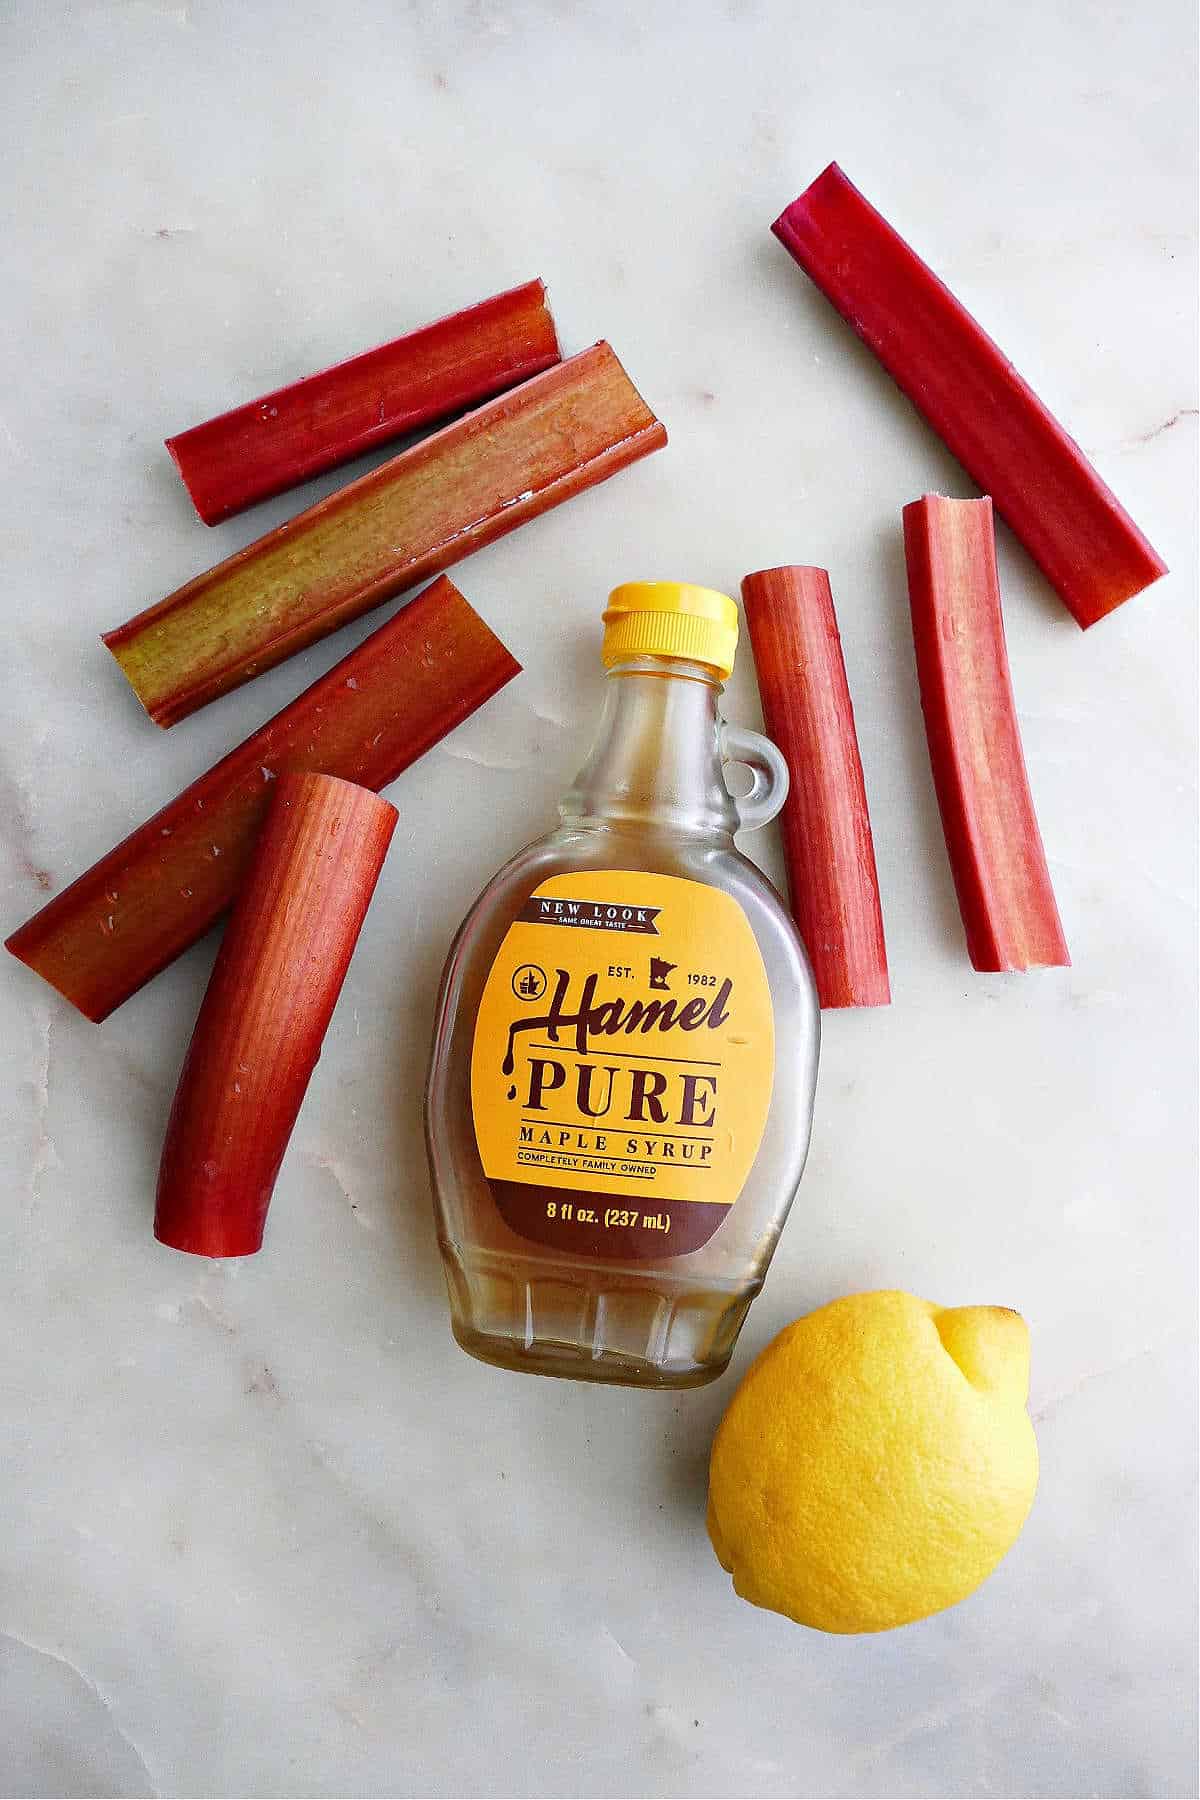 stalks of rhubarb next to a maple syrup container and a lemon on a counter